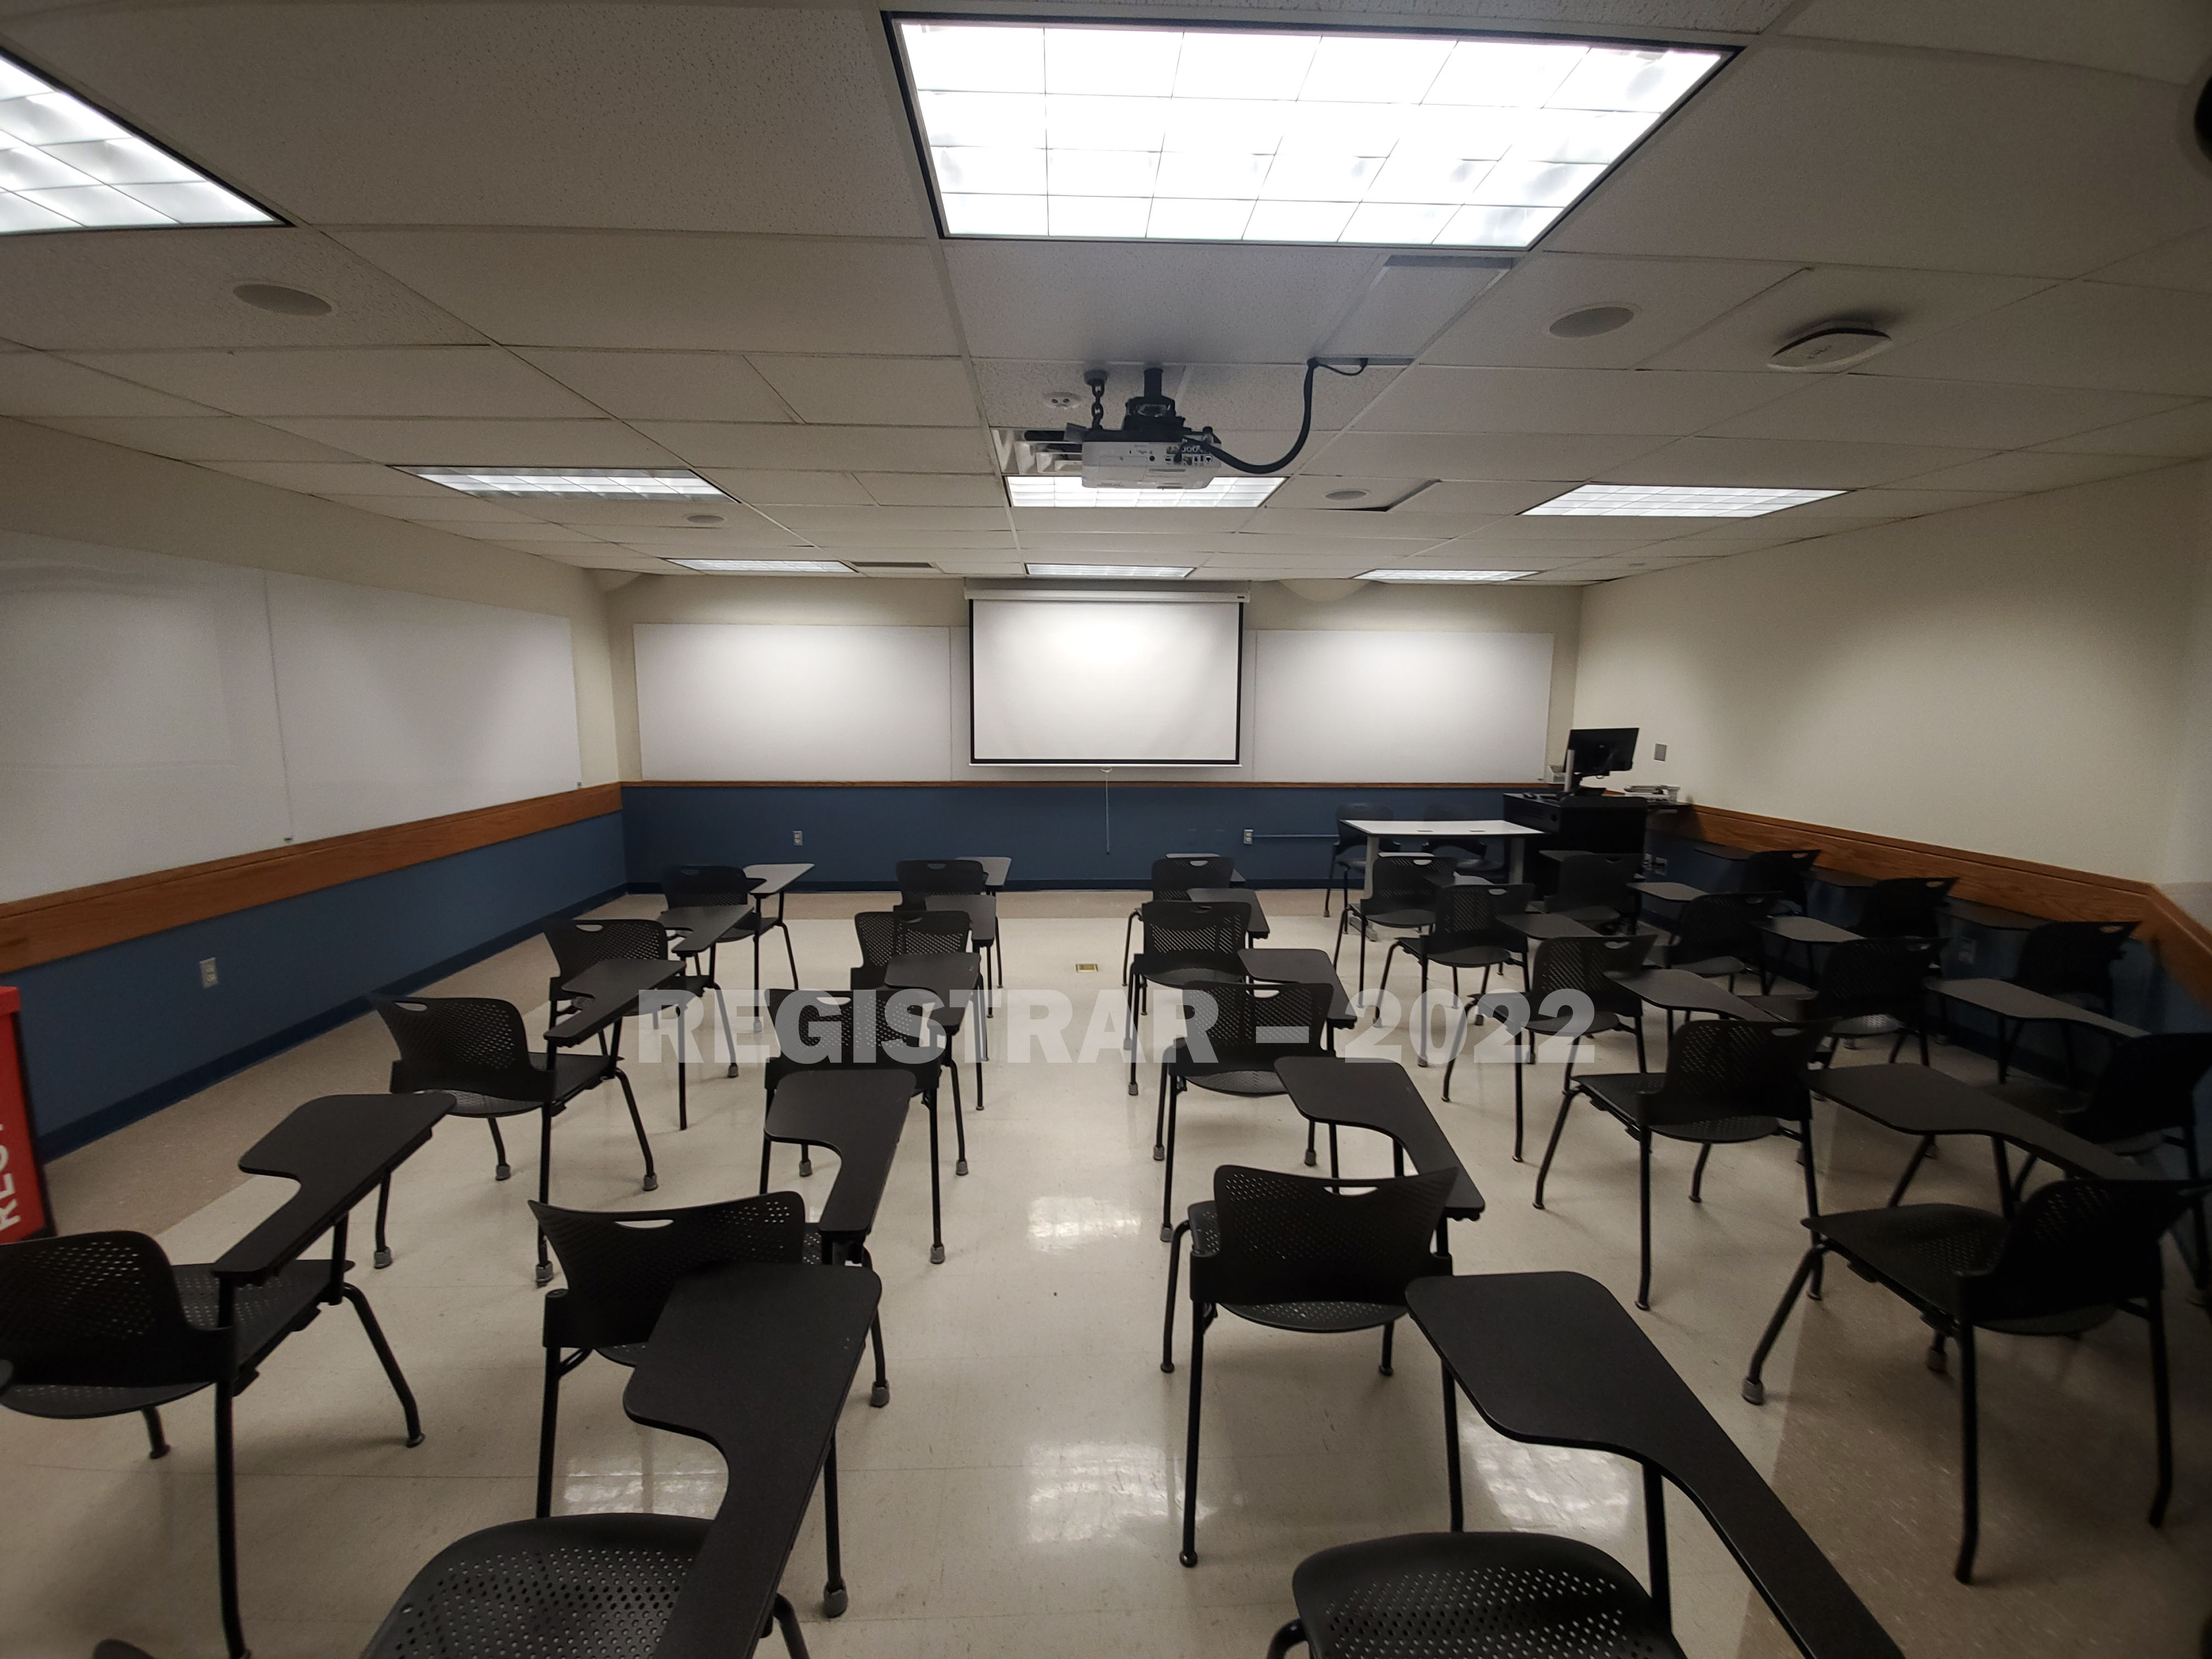 Enarson Classroom Building room 211 ultra wide angle view from the back of the room with projector screen down